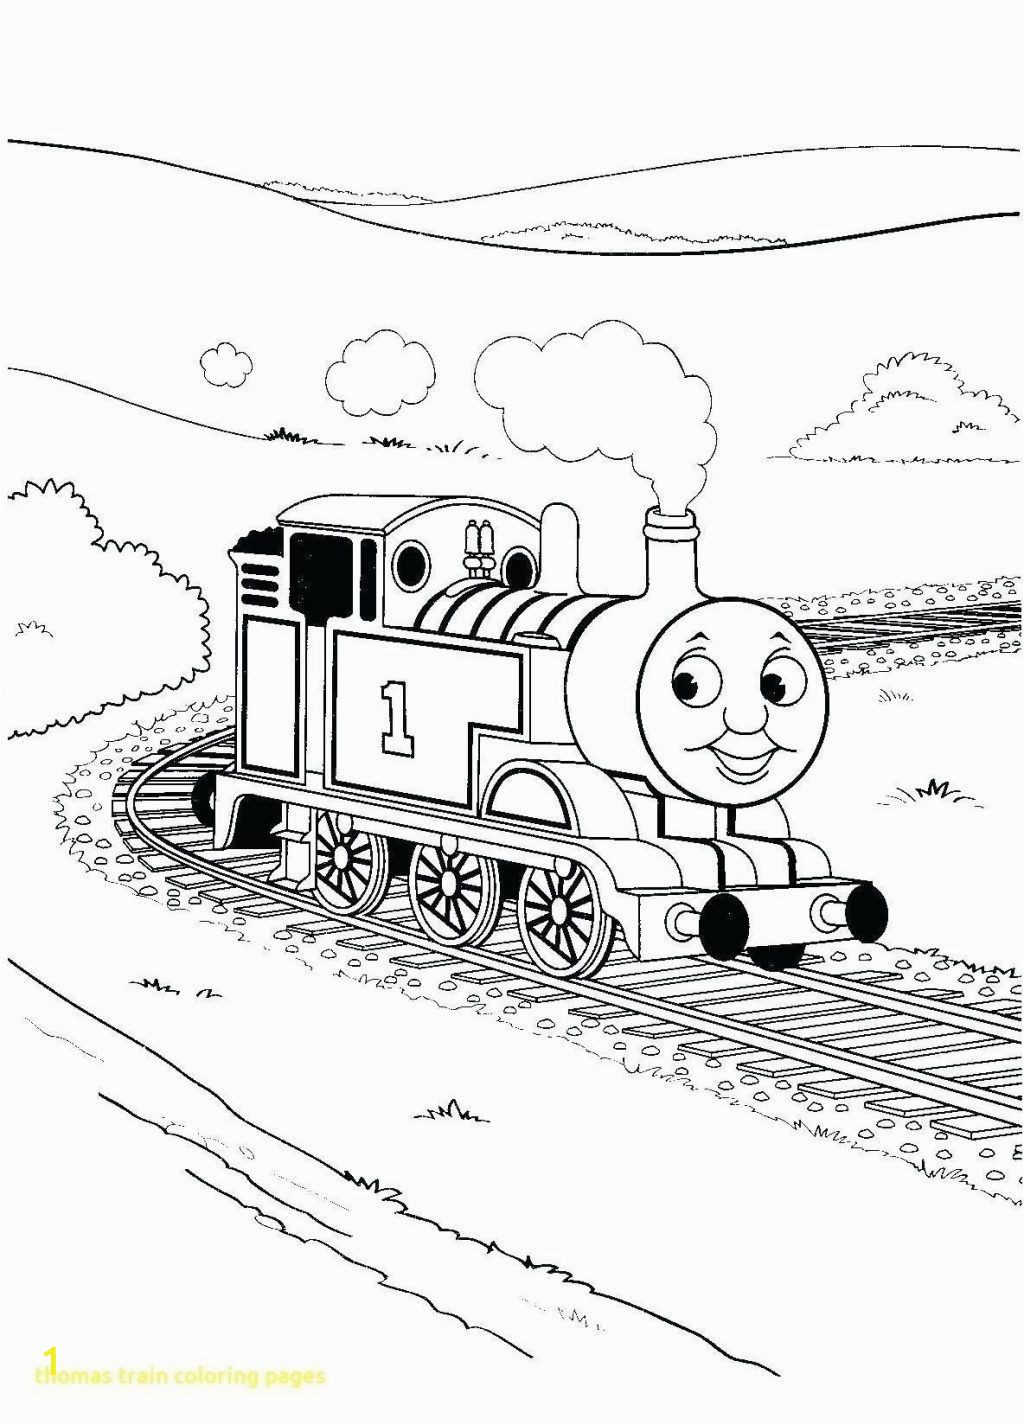 Free Coloring Pages Train Engine Alphabet Train Coloring Pages Coloring Pages Coloring Page